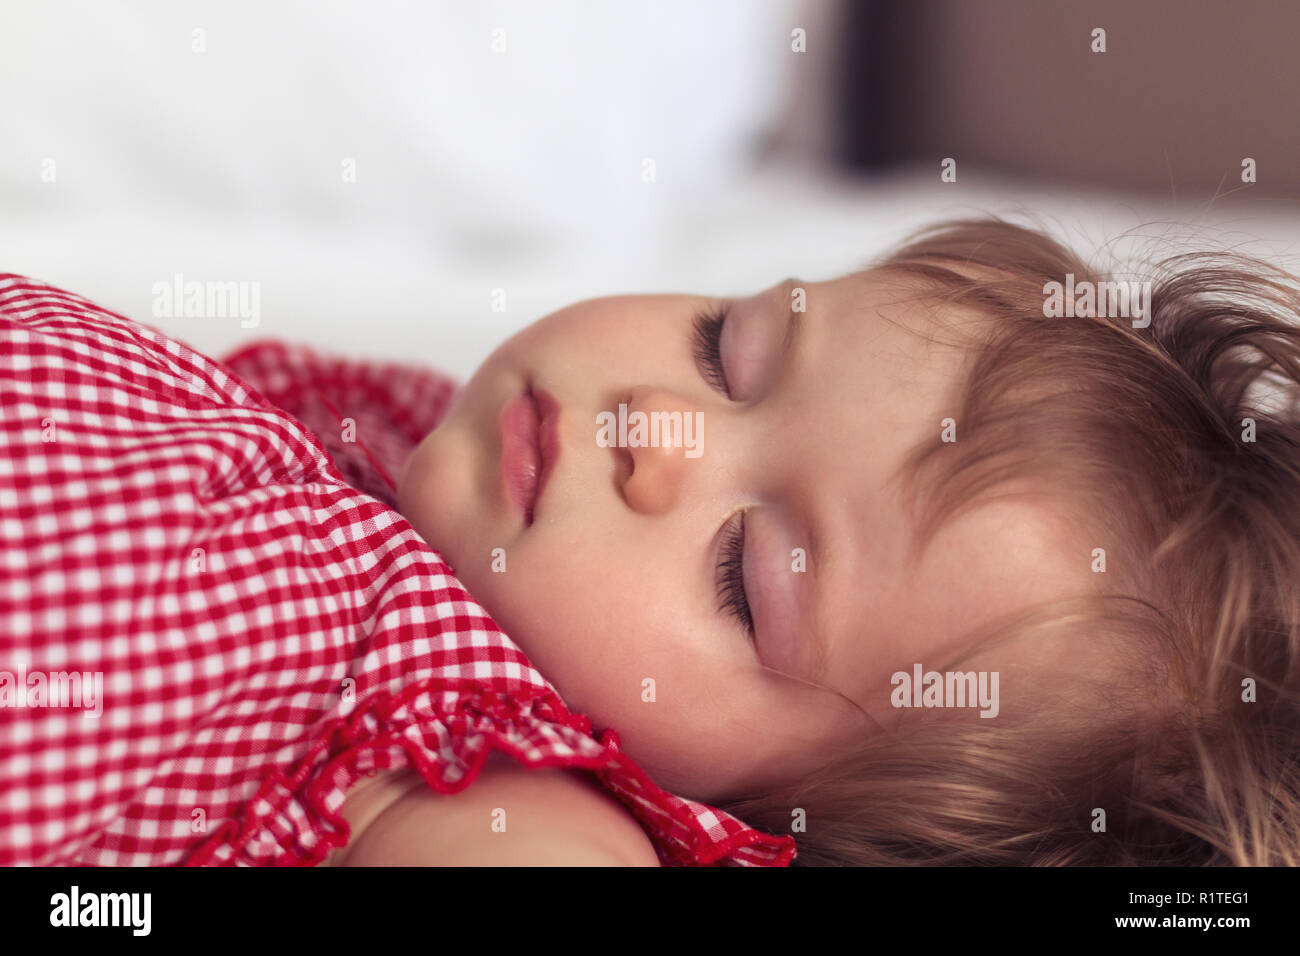 Close up portrait of a beautiful nine month old baby girl sleeping on blurred background. Sleeping child face. Cute infant kid. Child portrait in past Stock Photo